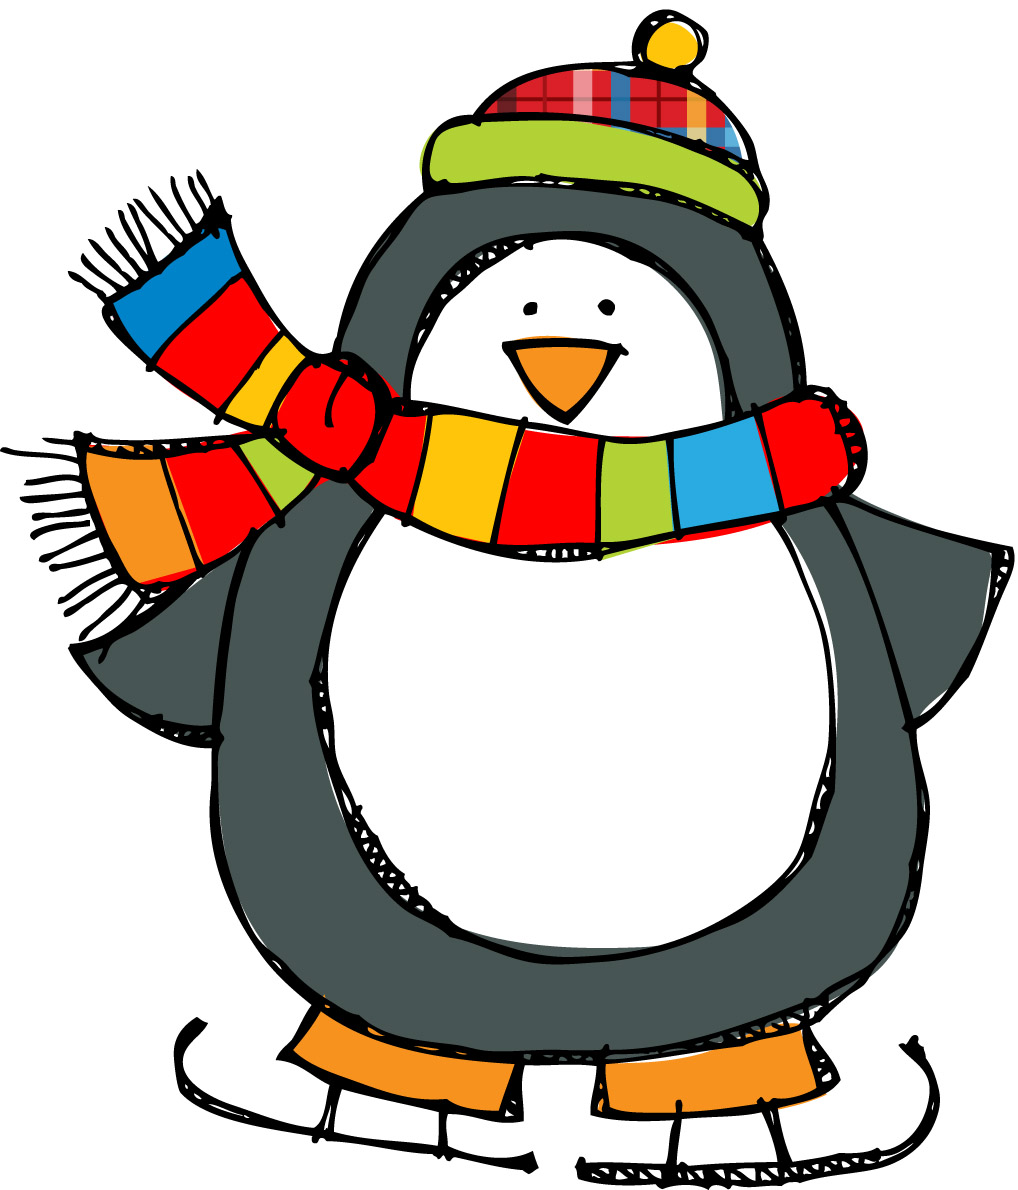 free clipart winter sports - photo #40